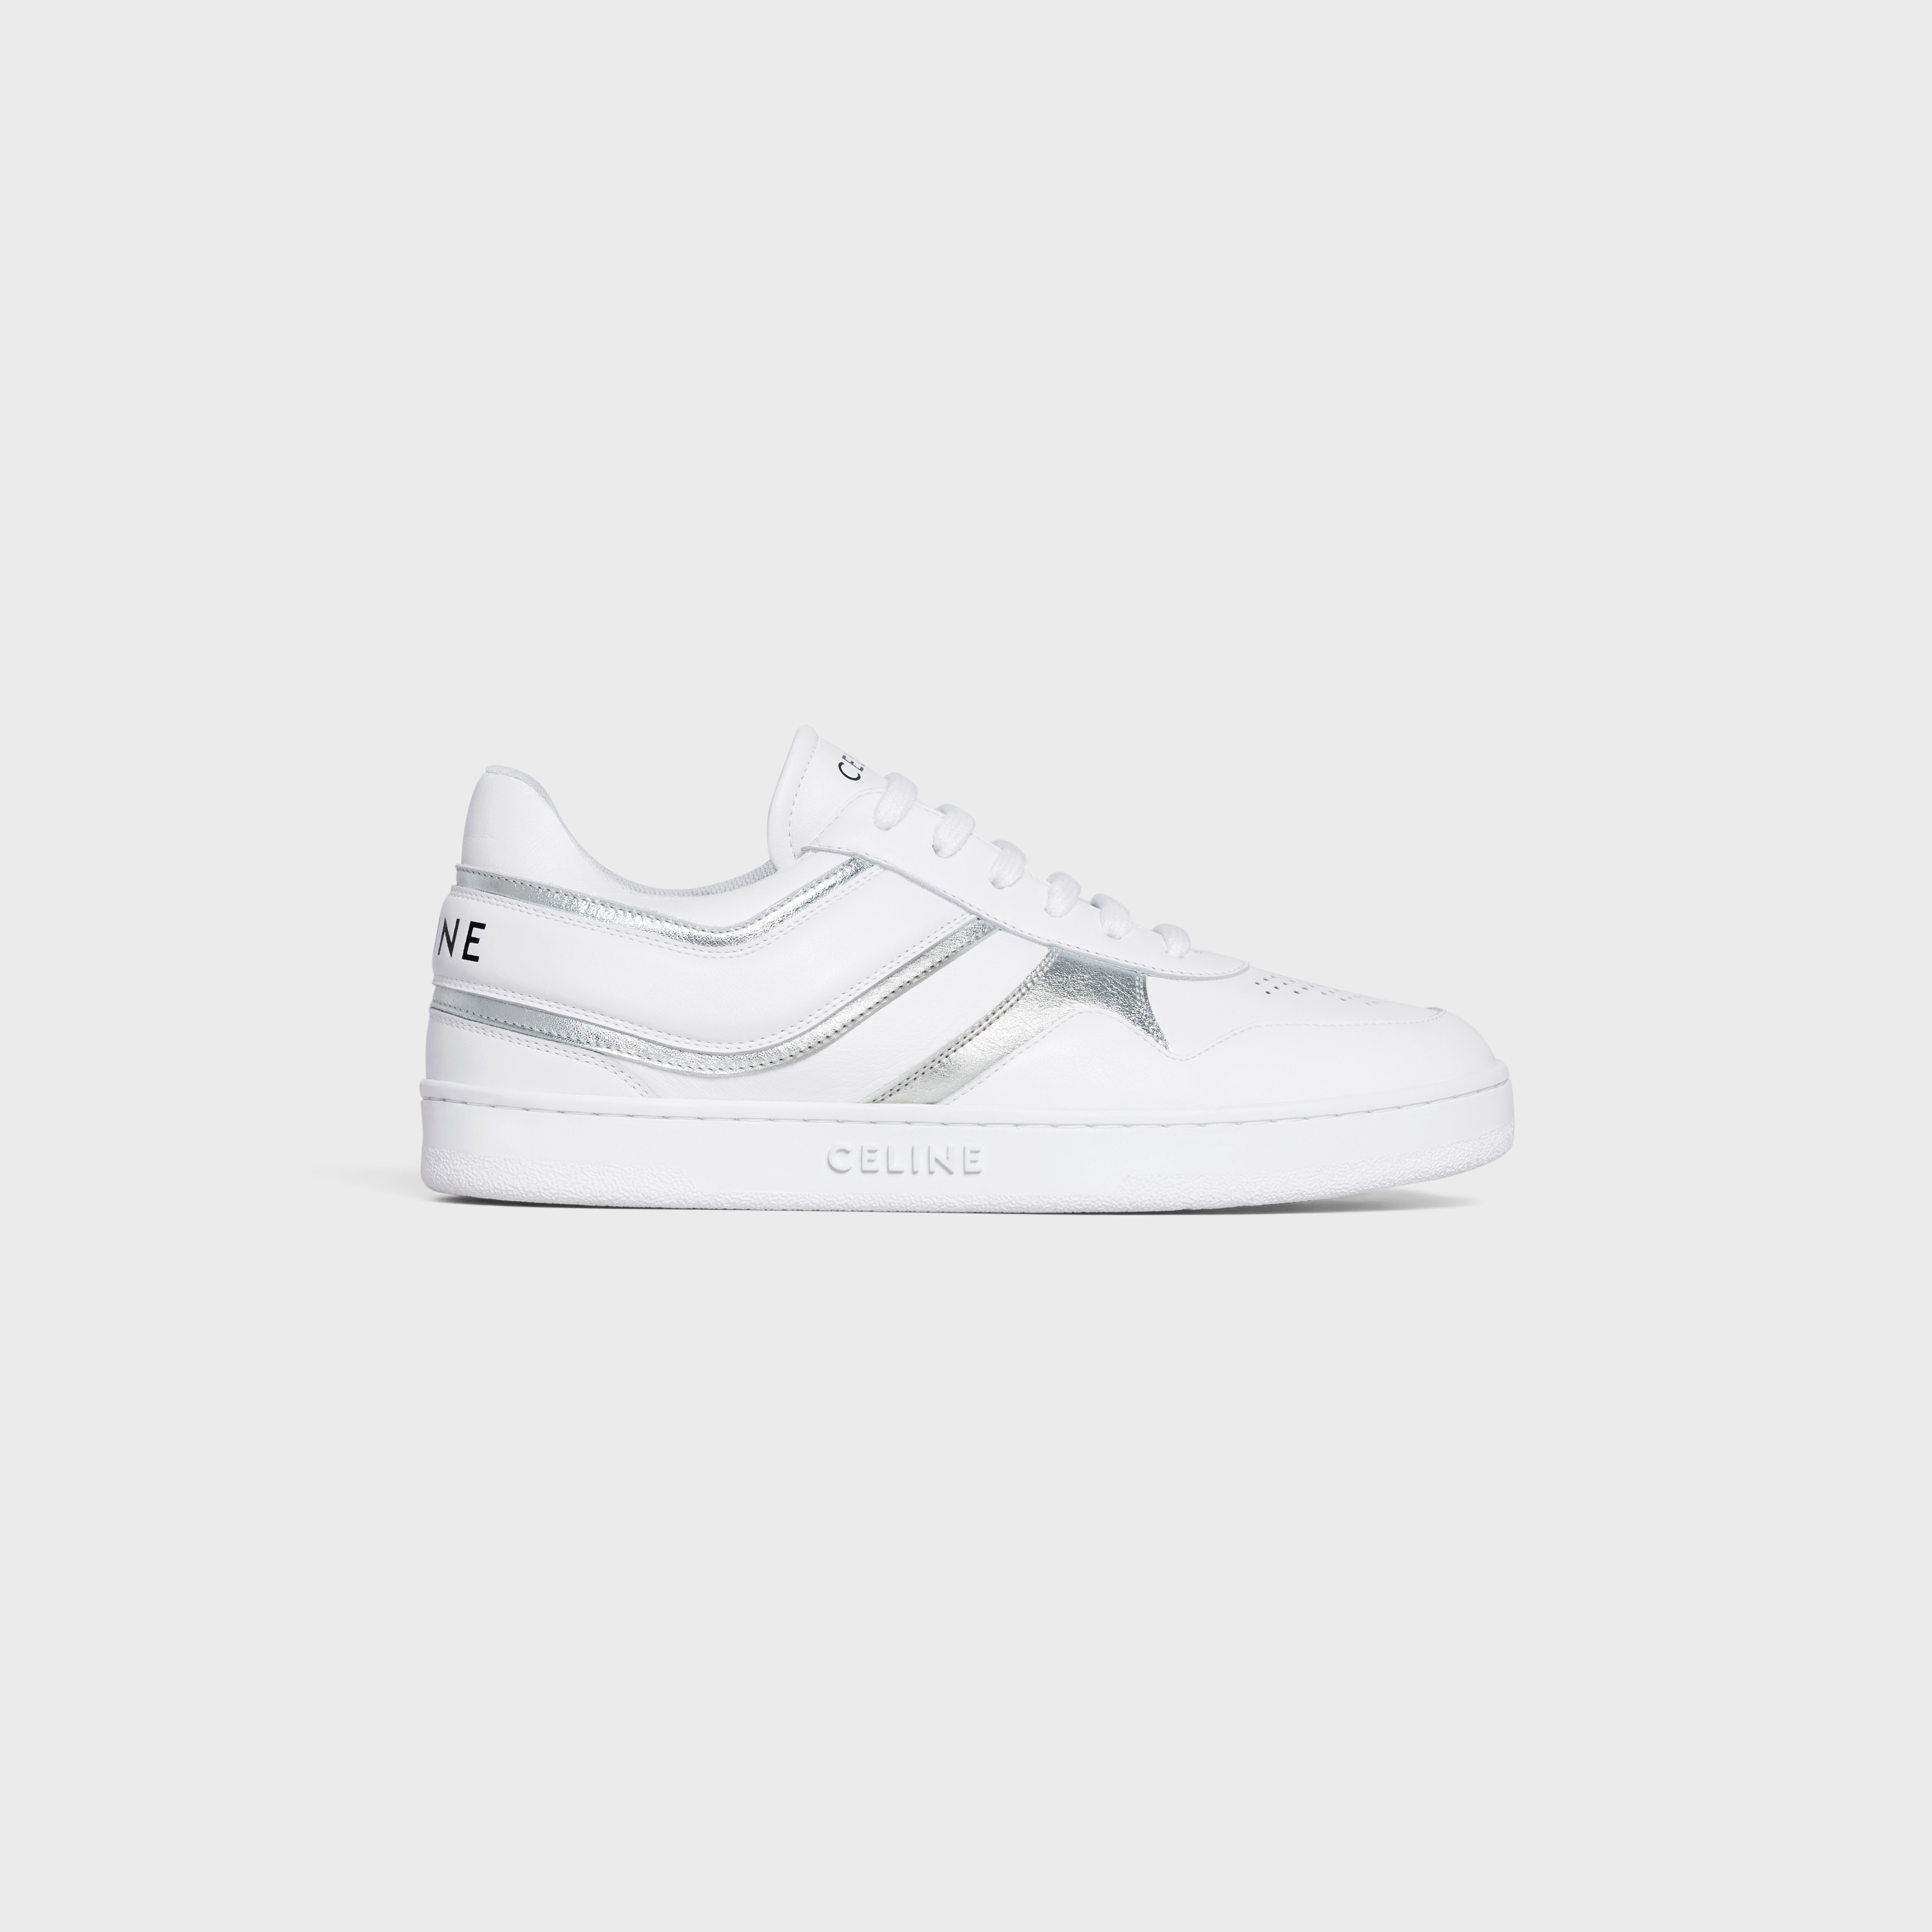 CELINE TRAINER LOW LACE-UP SNEAKER in CALFSKIN & LAMINATED CALFSKIN - 1